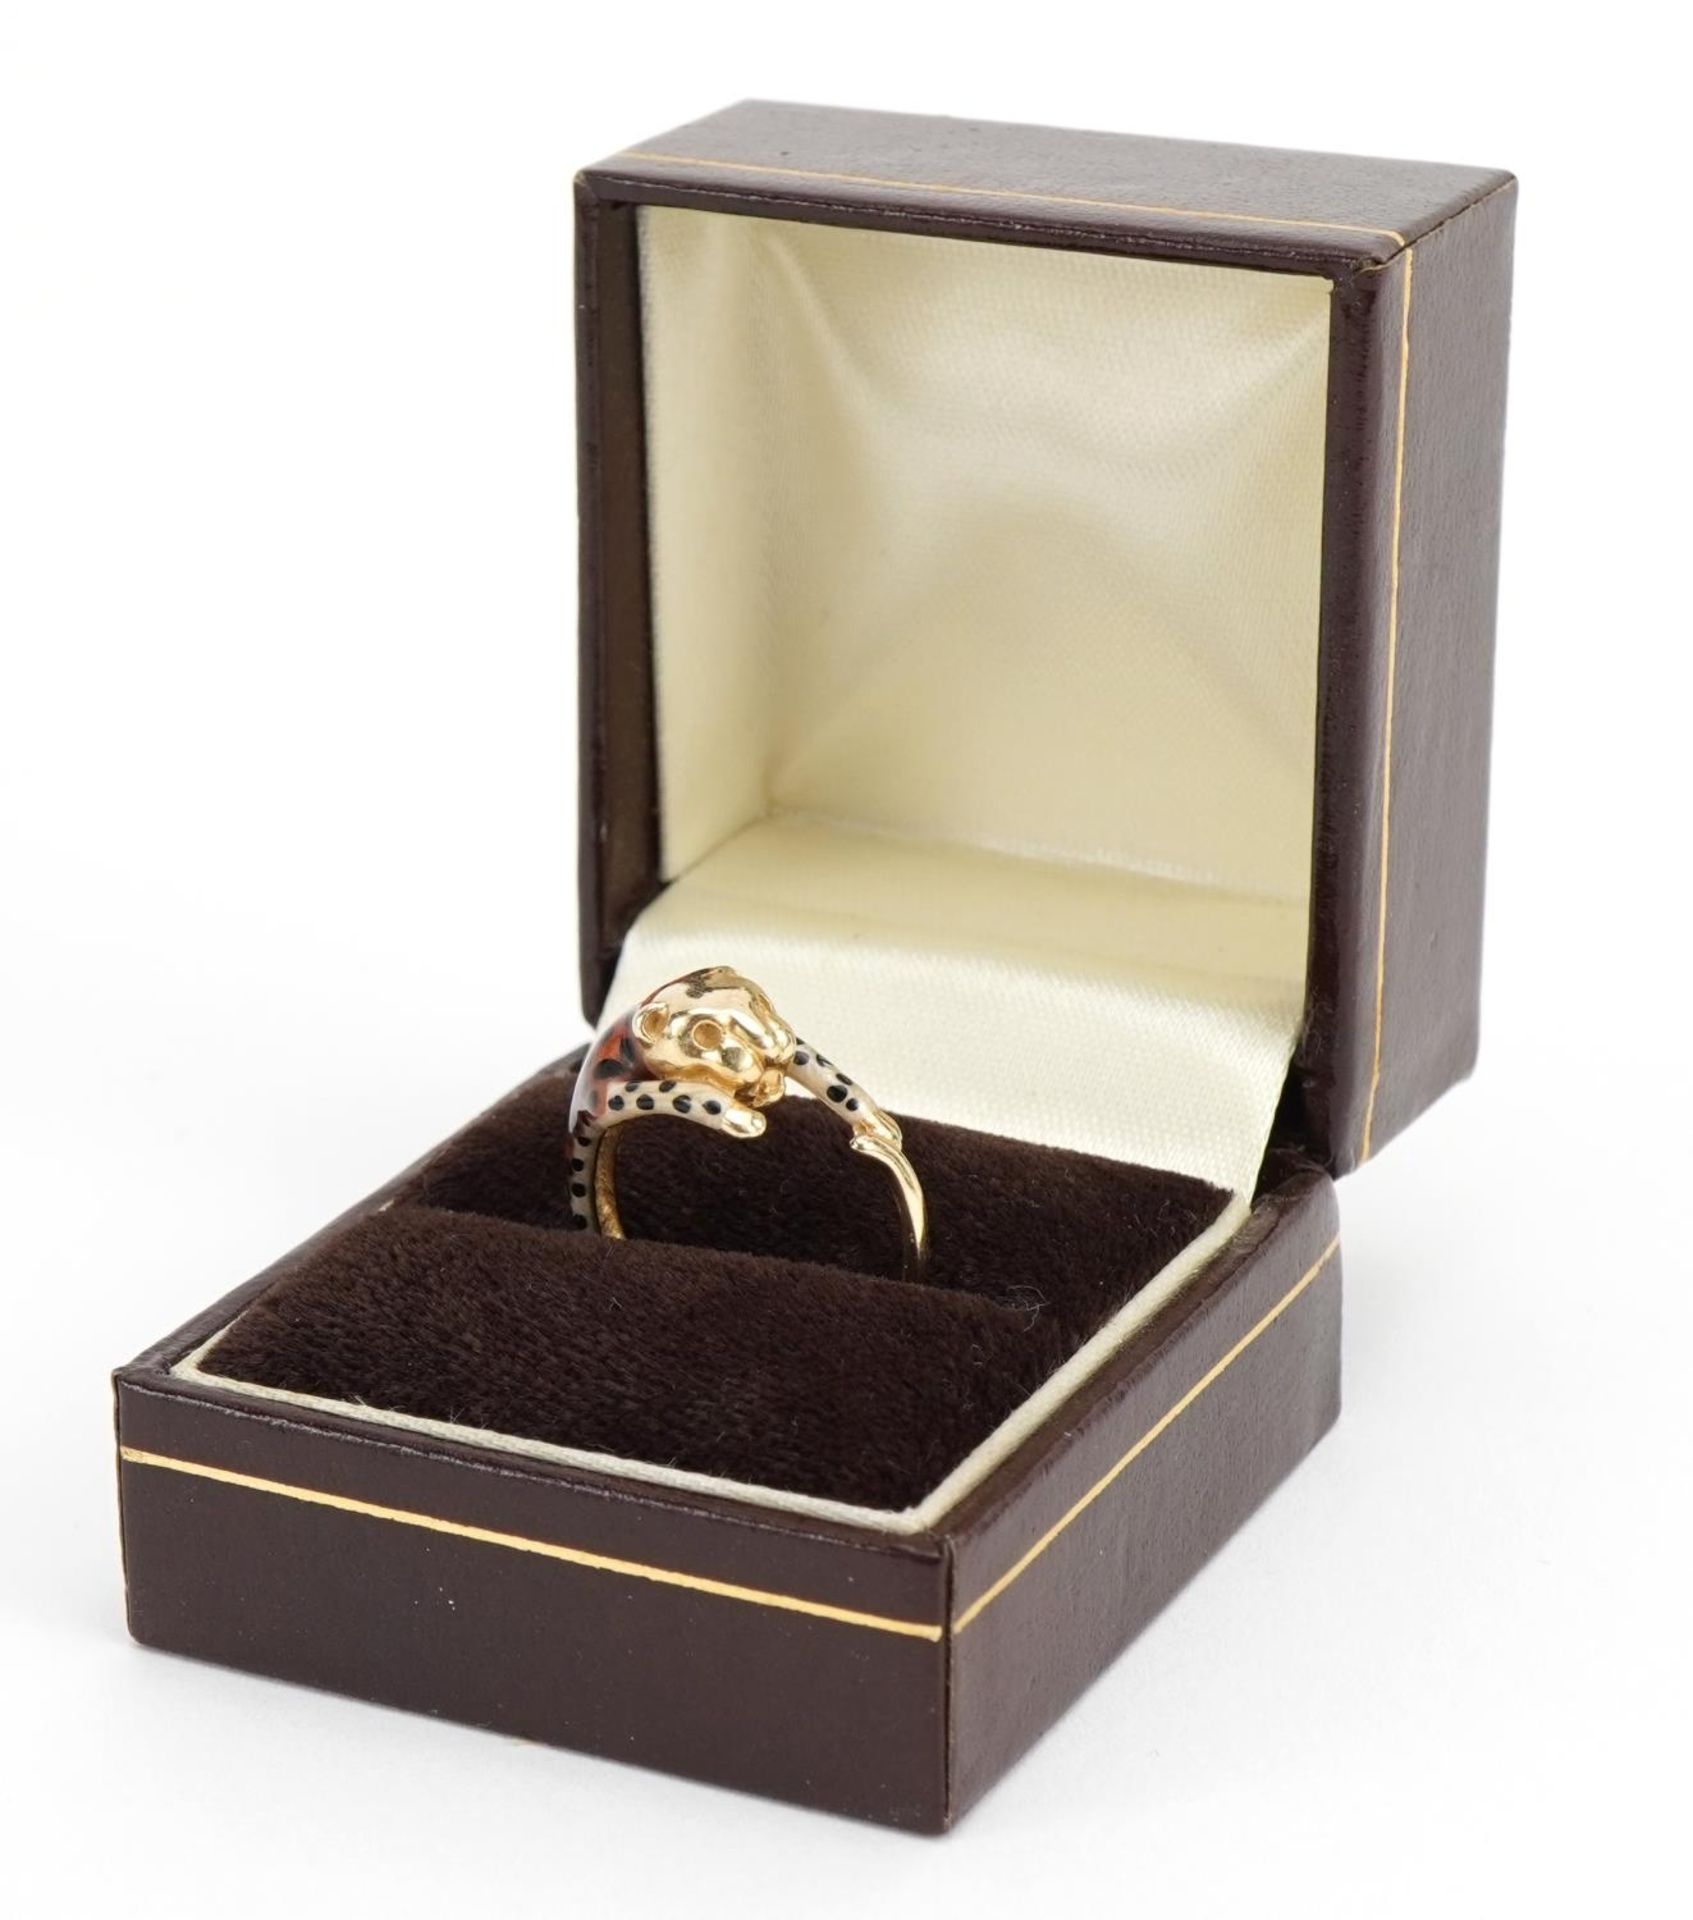 14k gold and enamel leopard ring, size M/N, 3.4g - Image 5 of 6